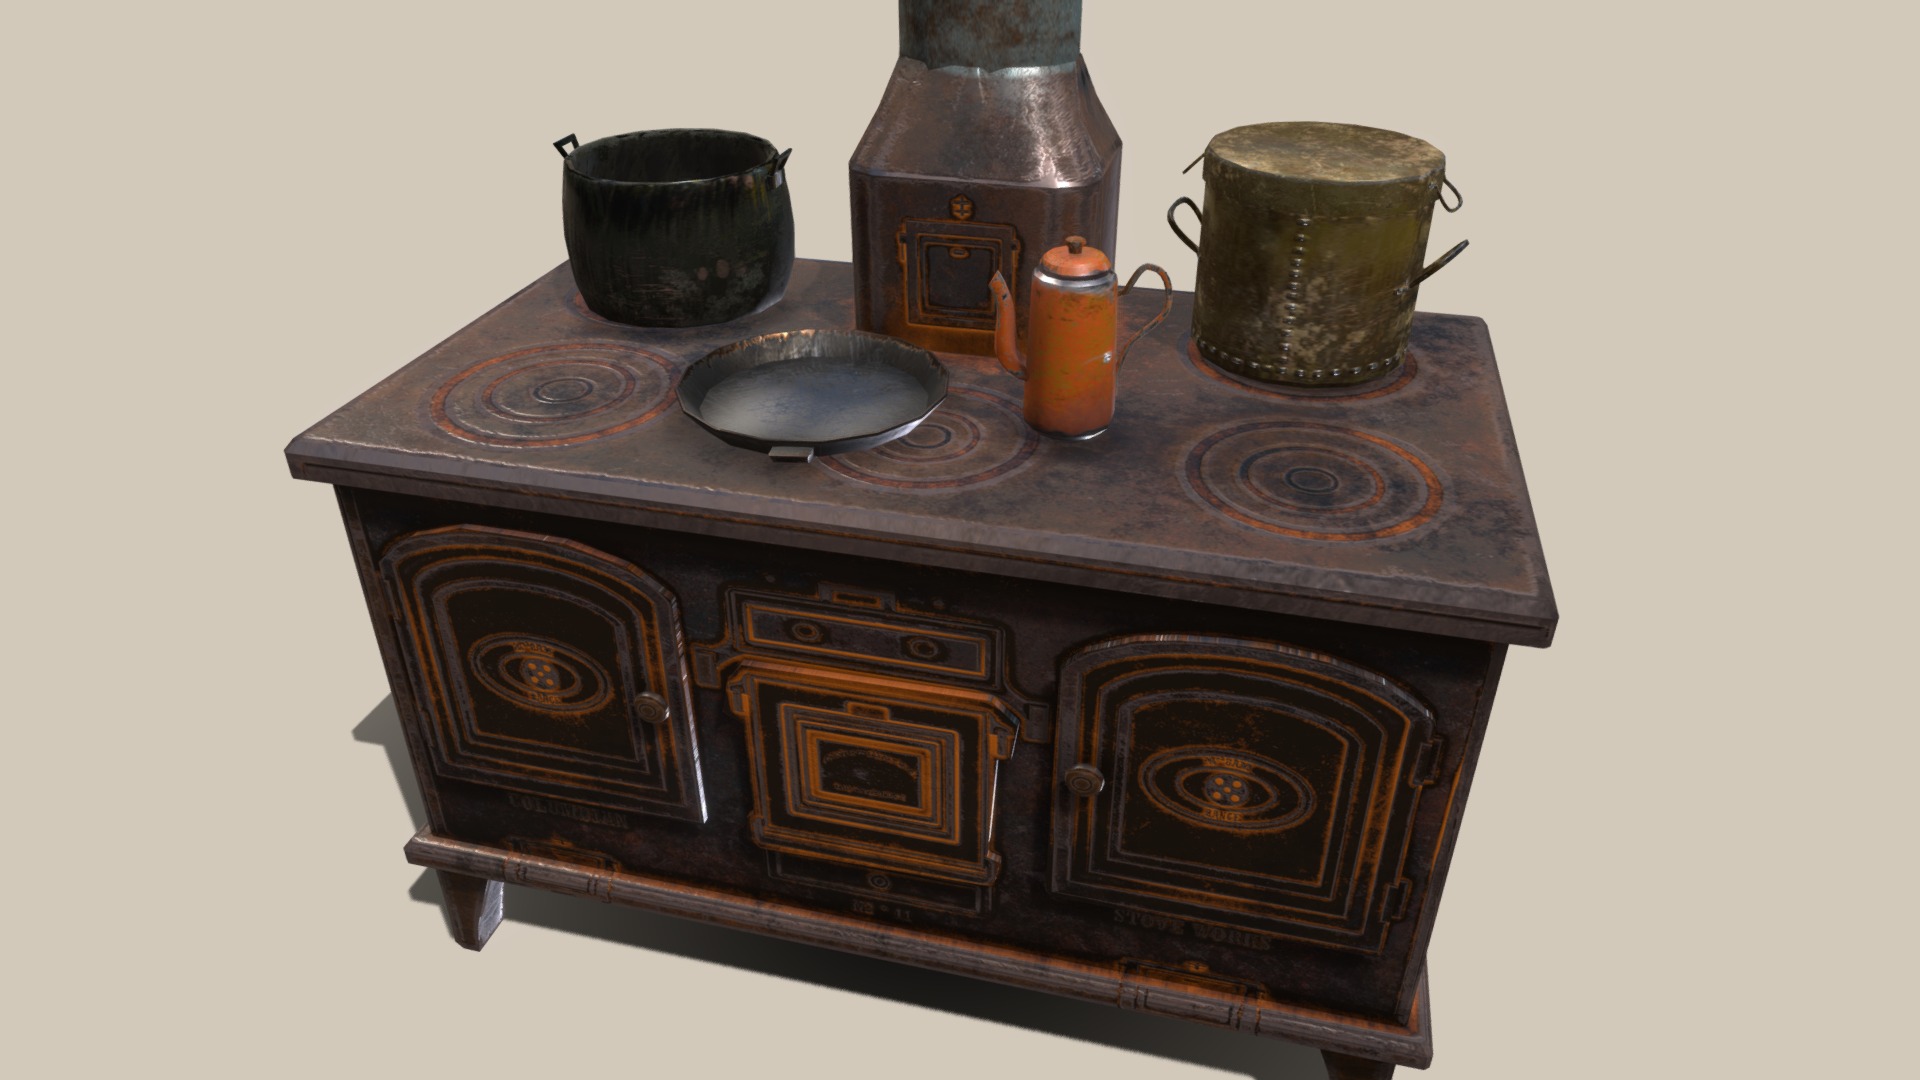 3D model Old stove and pots - This is a 3D model of the Old stove and pots. The 3D model is about a wooden chest with a few pots on top.